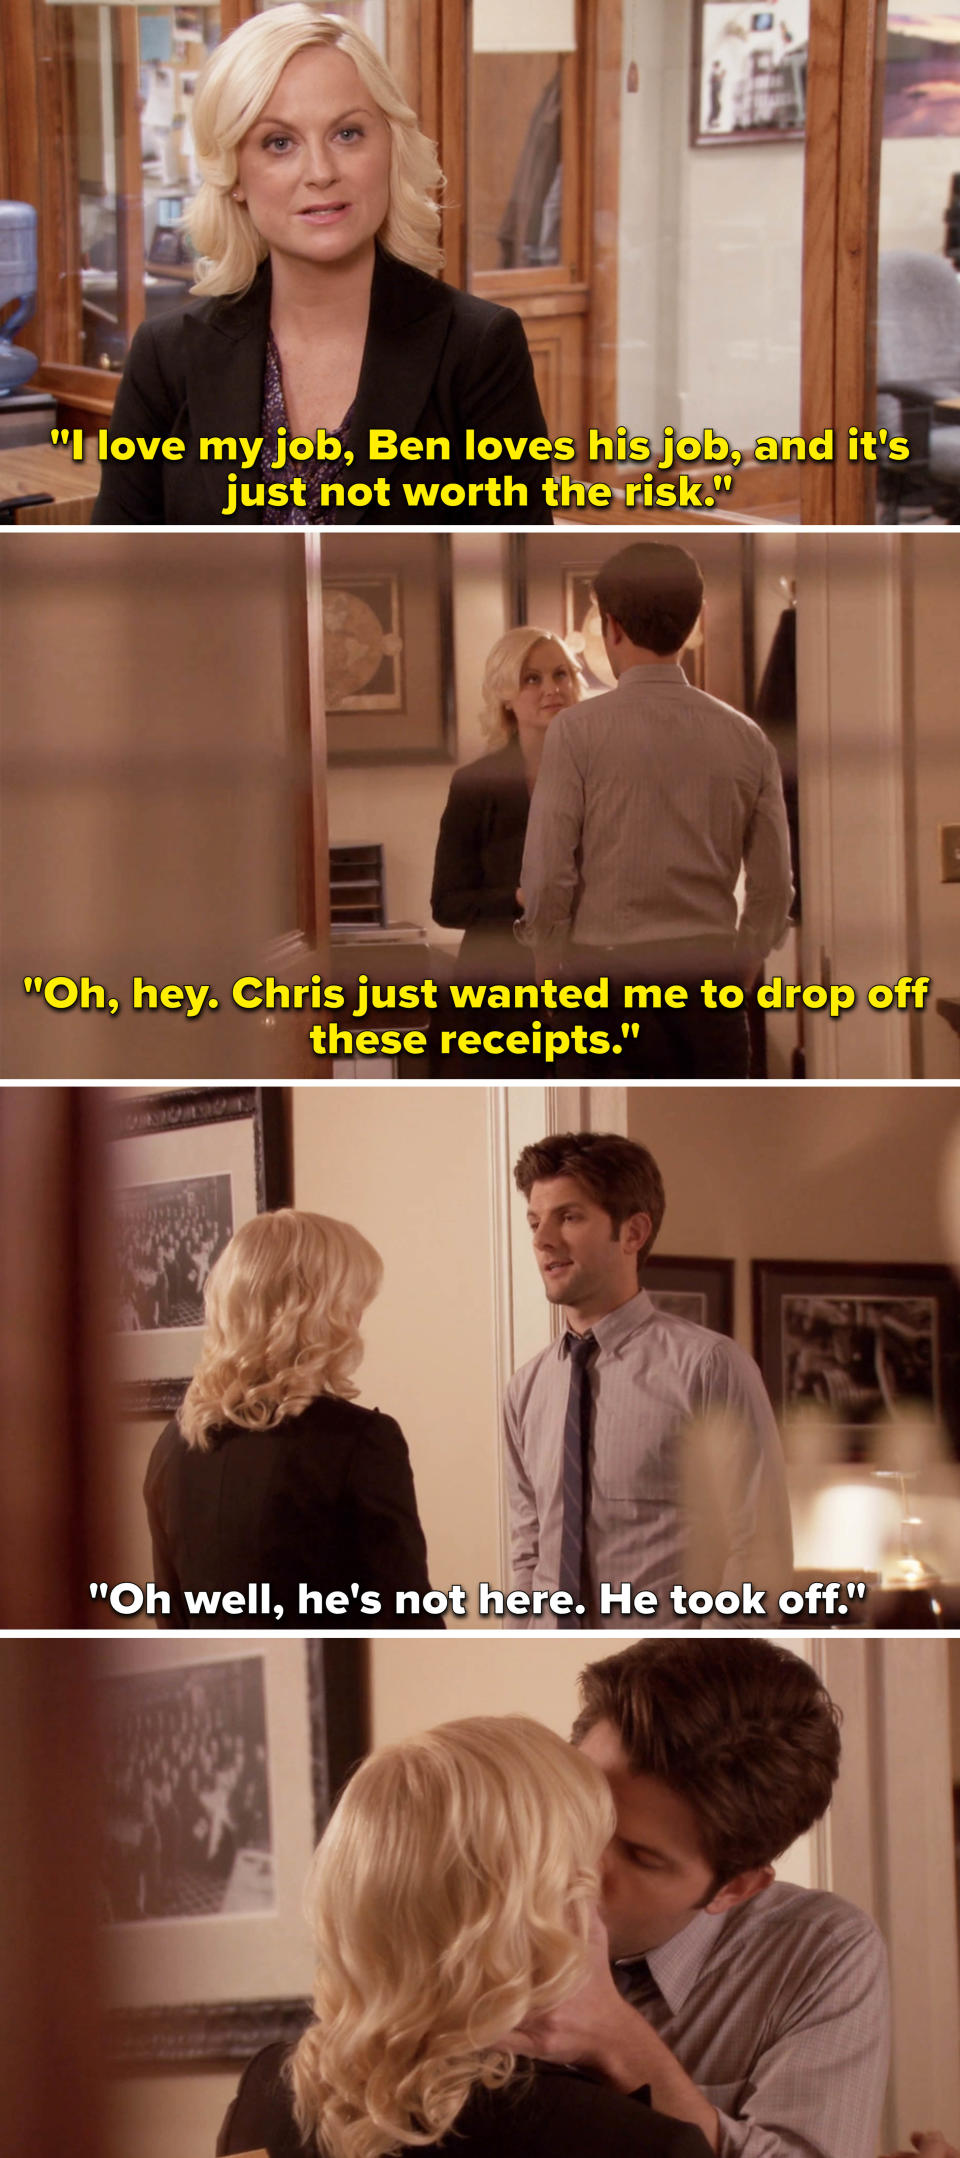 Screenshots from "Parks and Recreation"